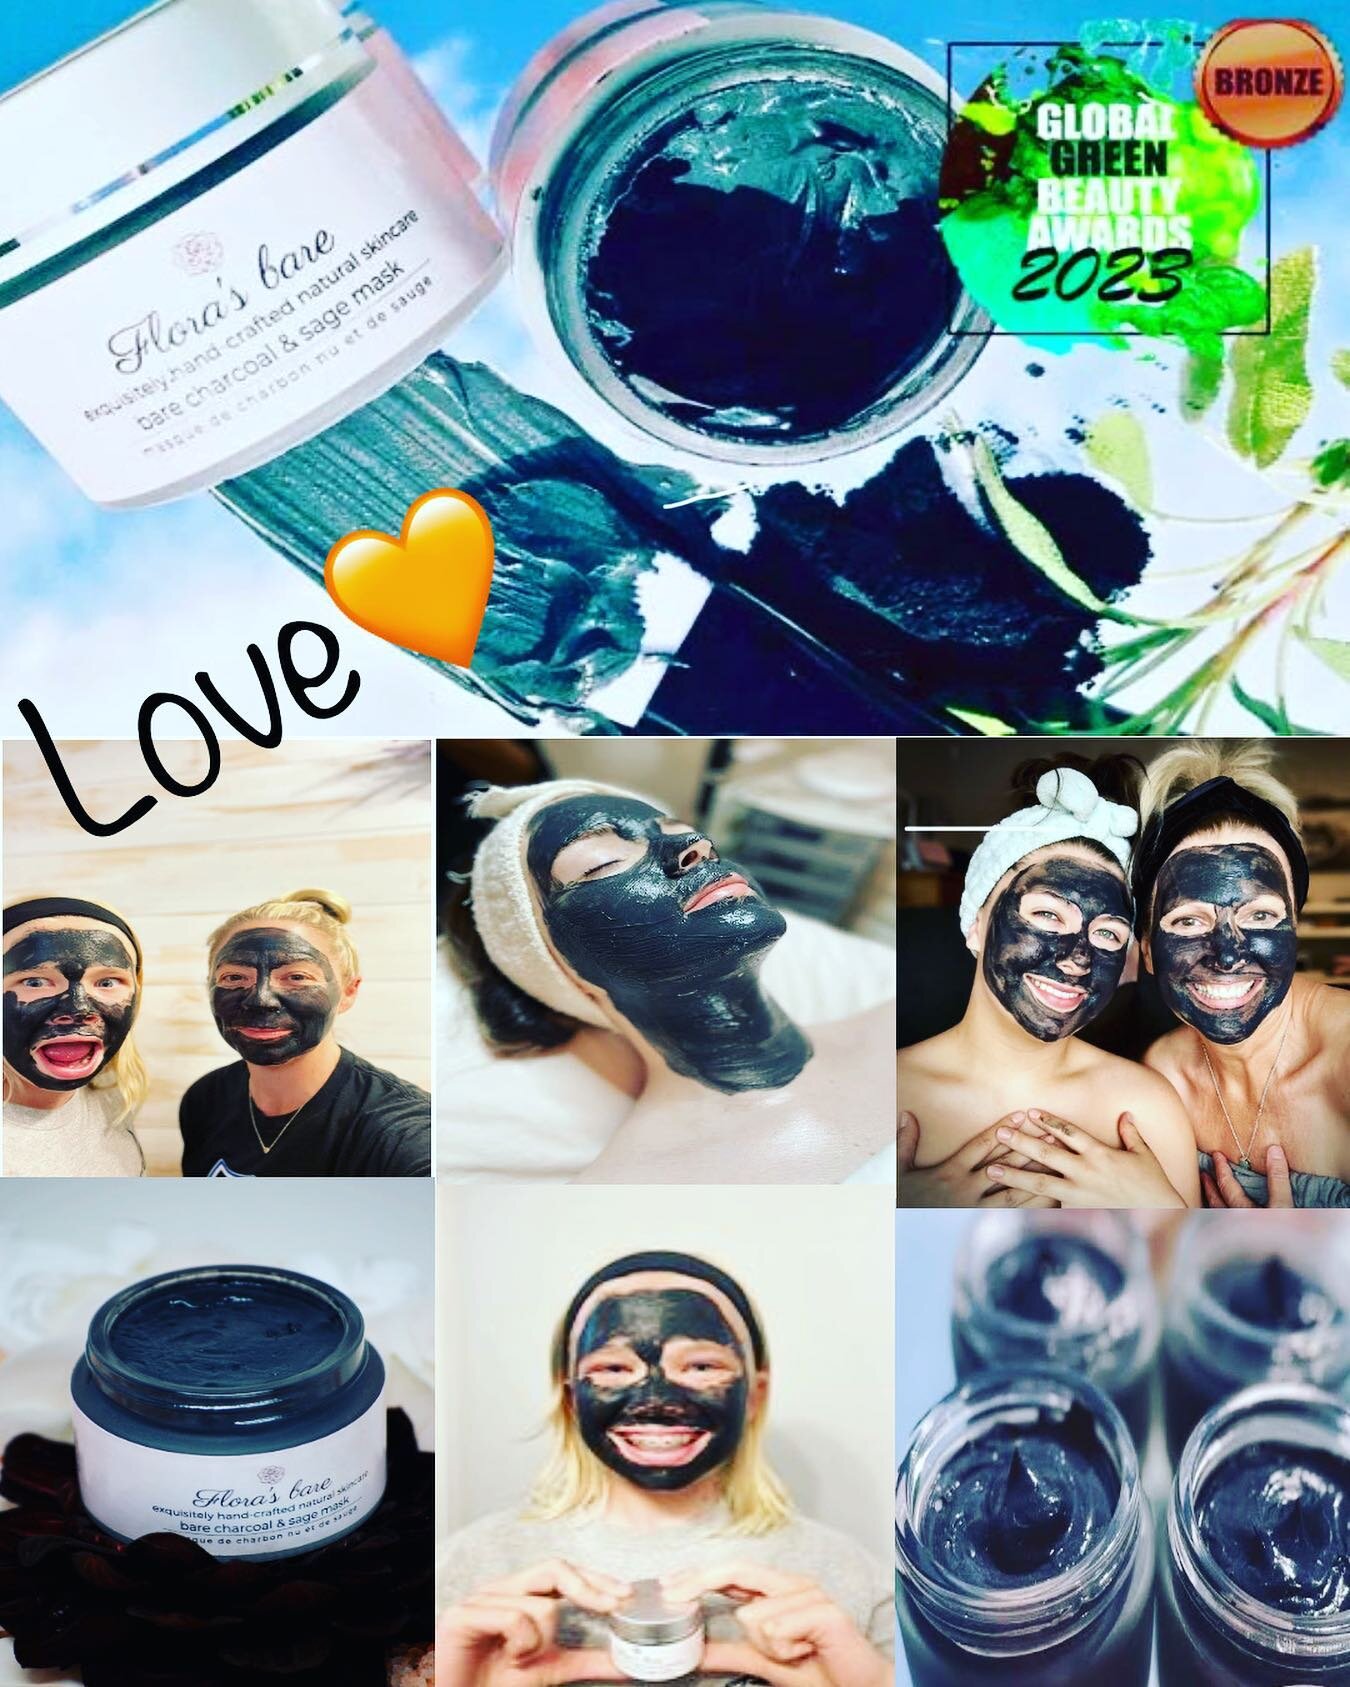 Love for our award winning bare charcoal and sage mask💗

Why charcoal?
~ activated bamboo charcoal detoxifies the skin by binding to the dirt and oils in the pores.

Why sage?
~ clary sage essential oil regulates oil production and has active antiba